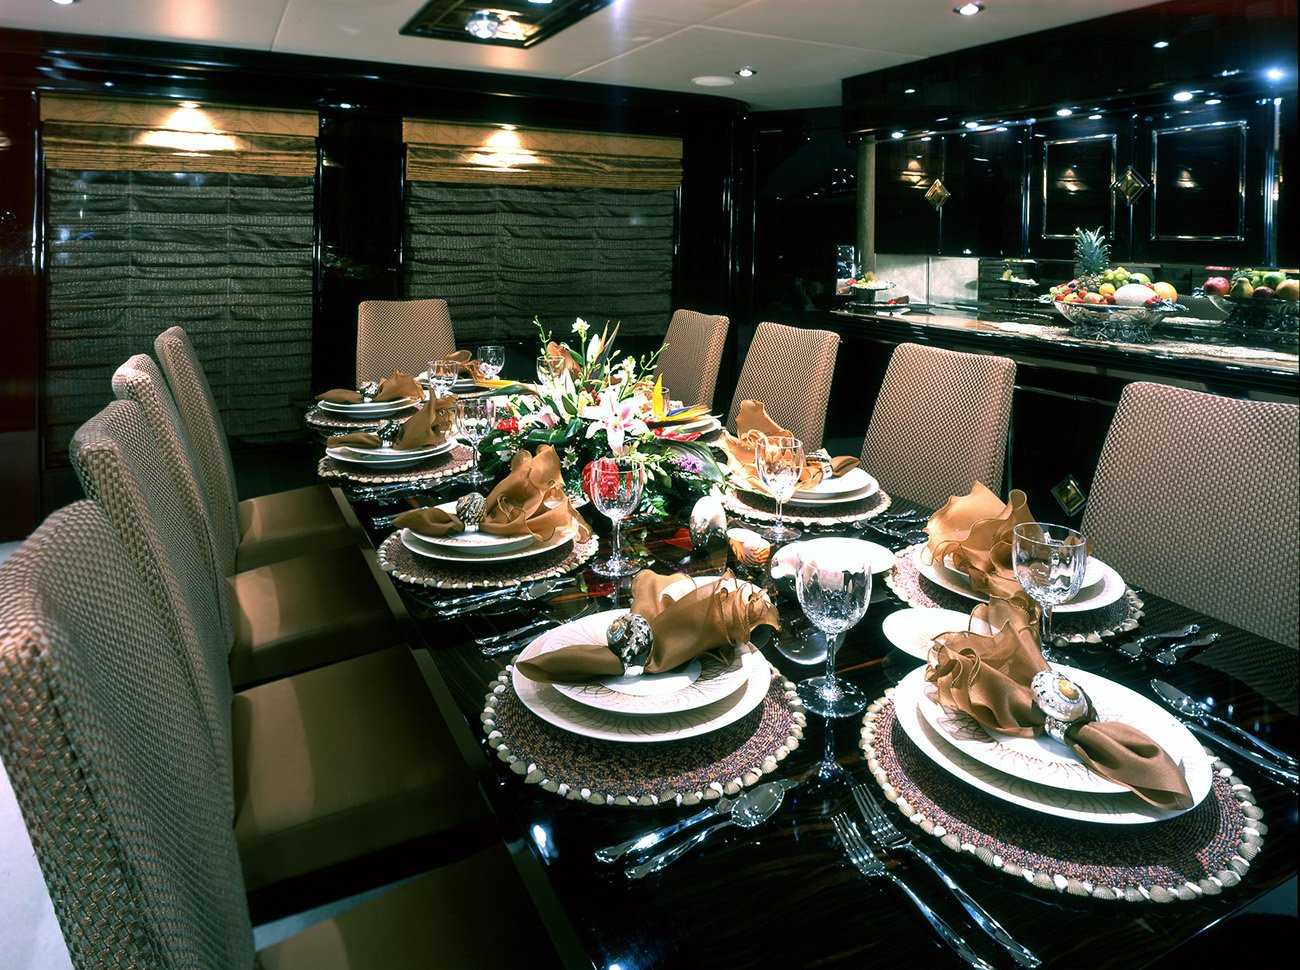 dining - Karen Lynn Interiors - Interior Design for Yacht, Aircrafts and Residential Projects